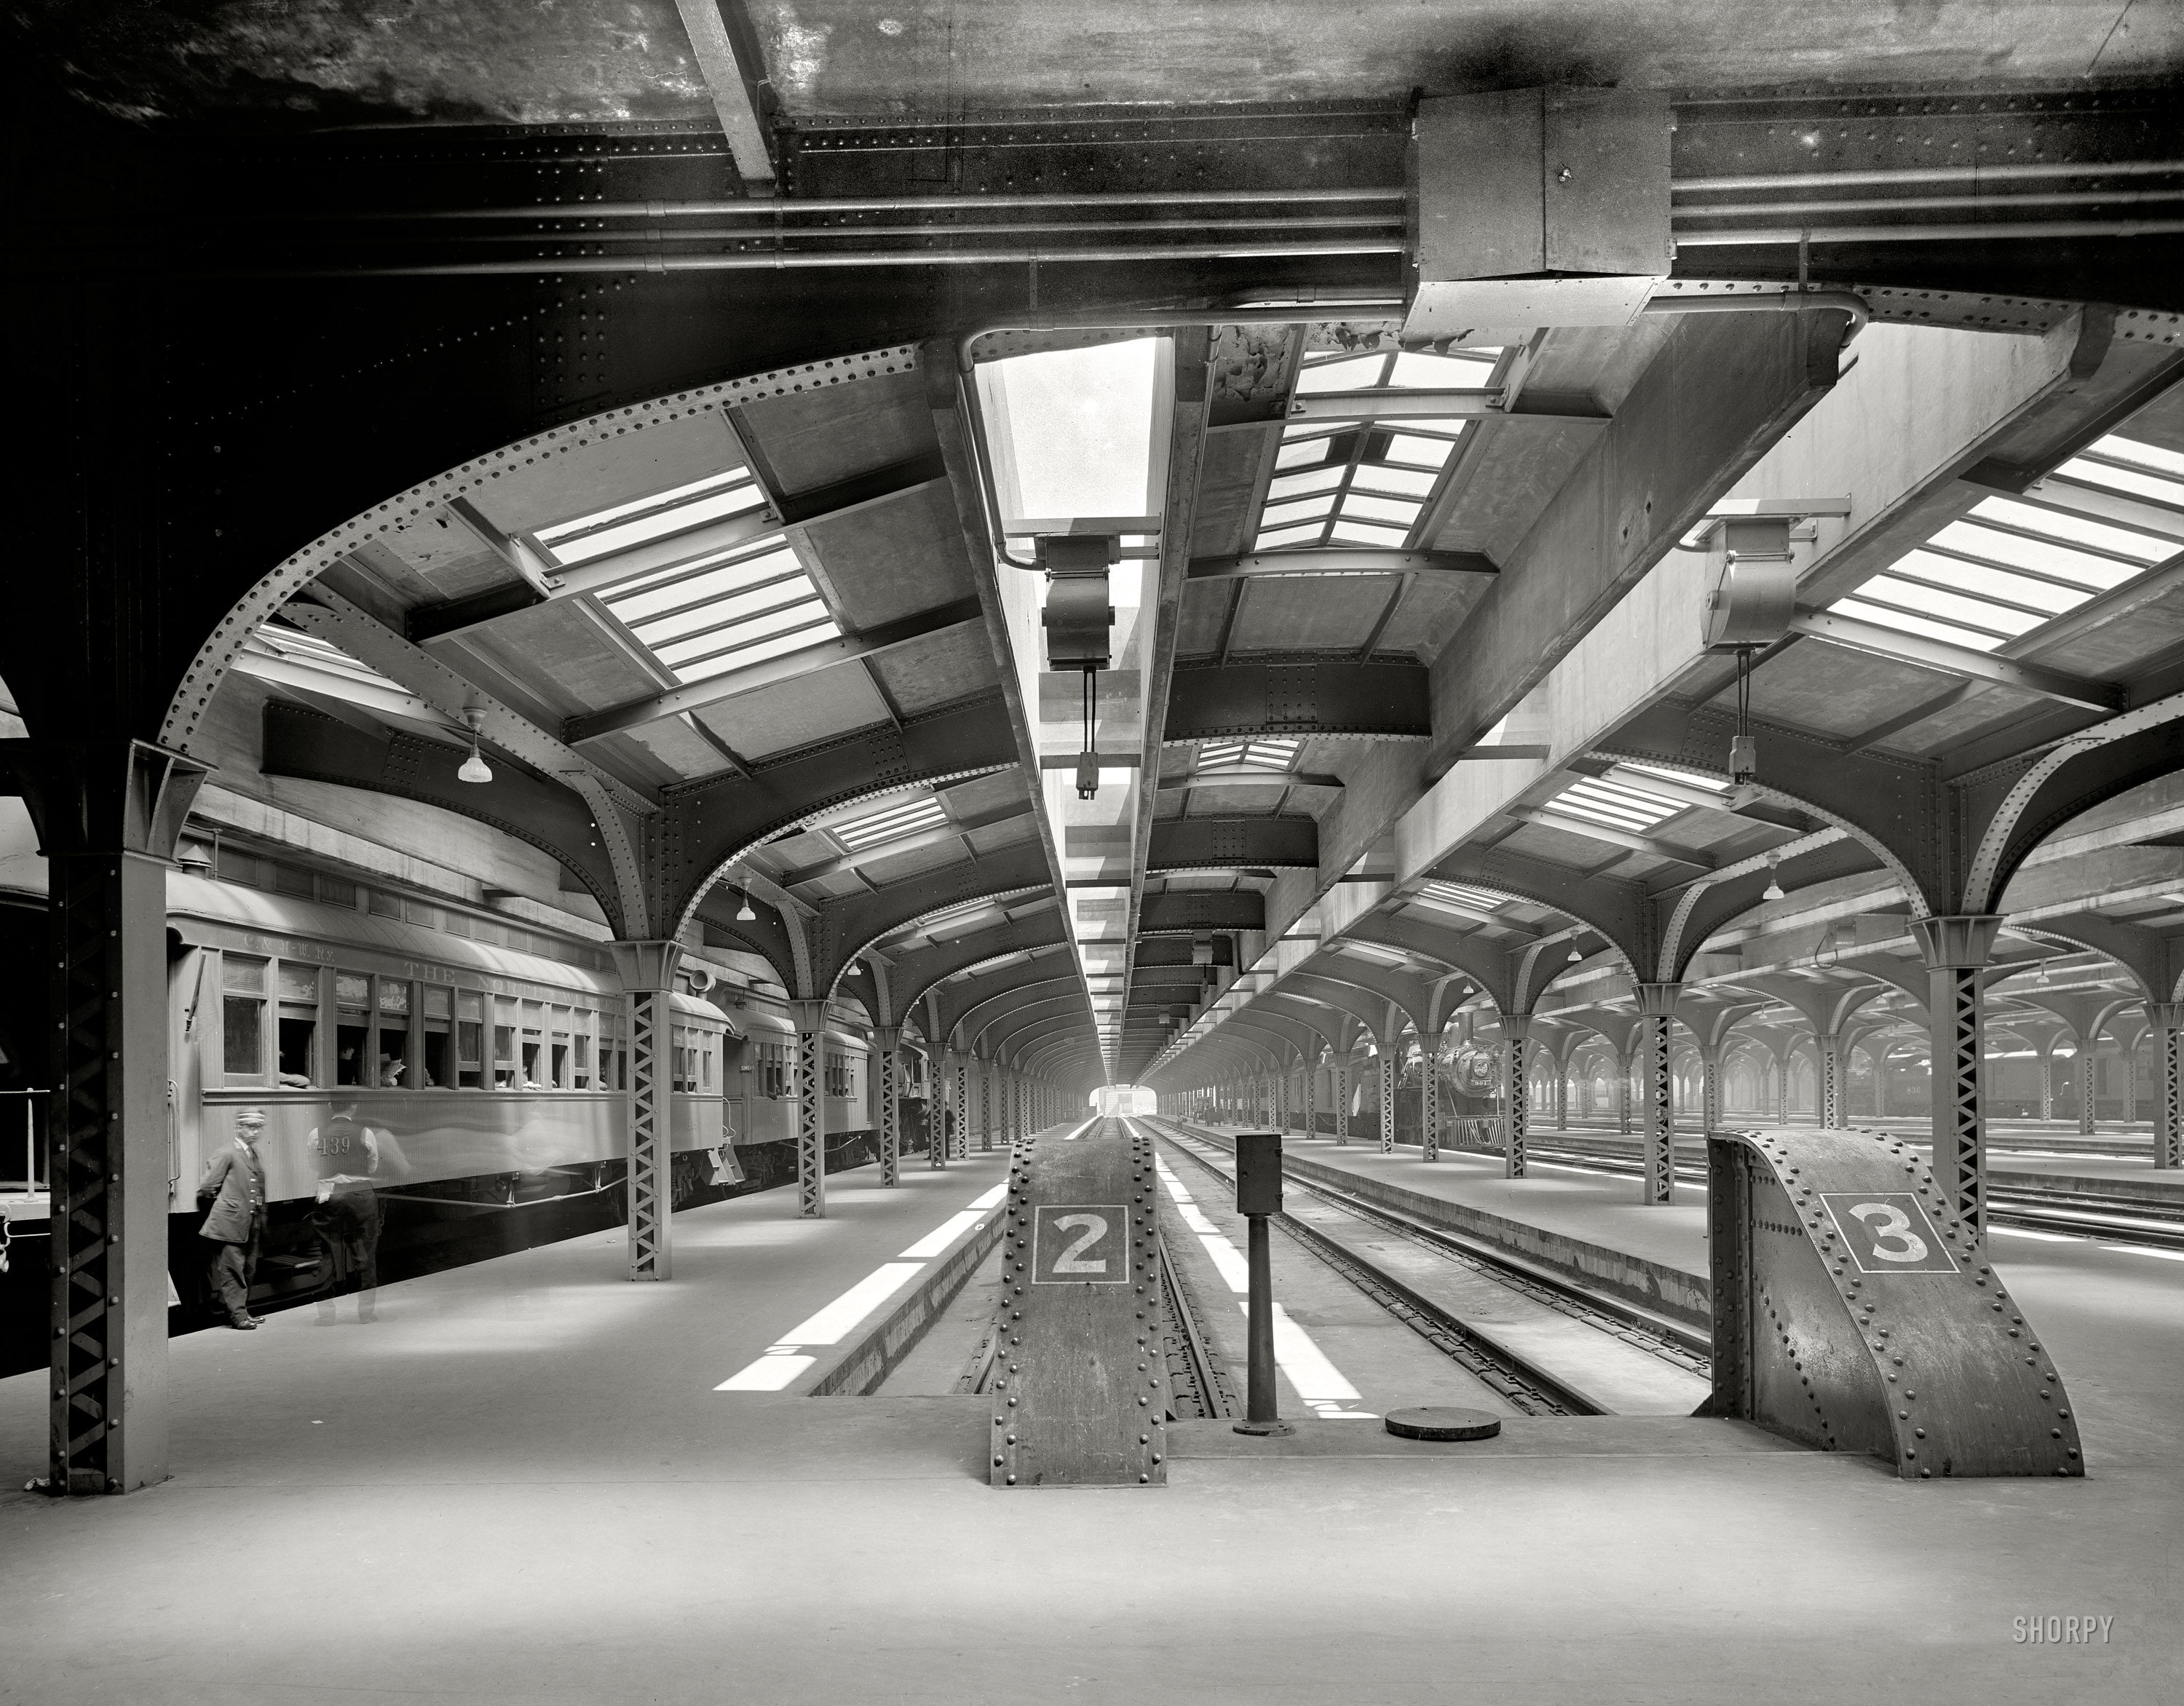 Chicago circa 1911. "Train sheds, Chicago & North Western Railway station." 8x10 inch dry plate glass negative, Detroit Publishing Company. View full size.